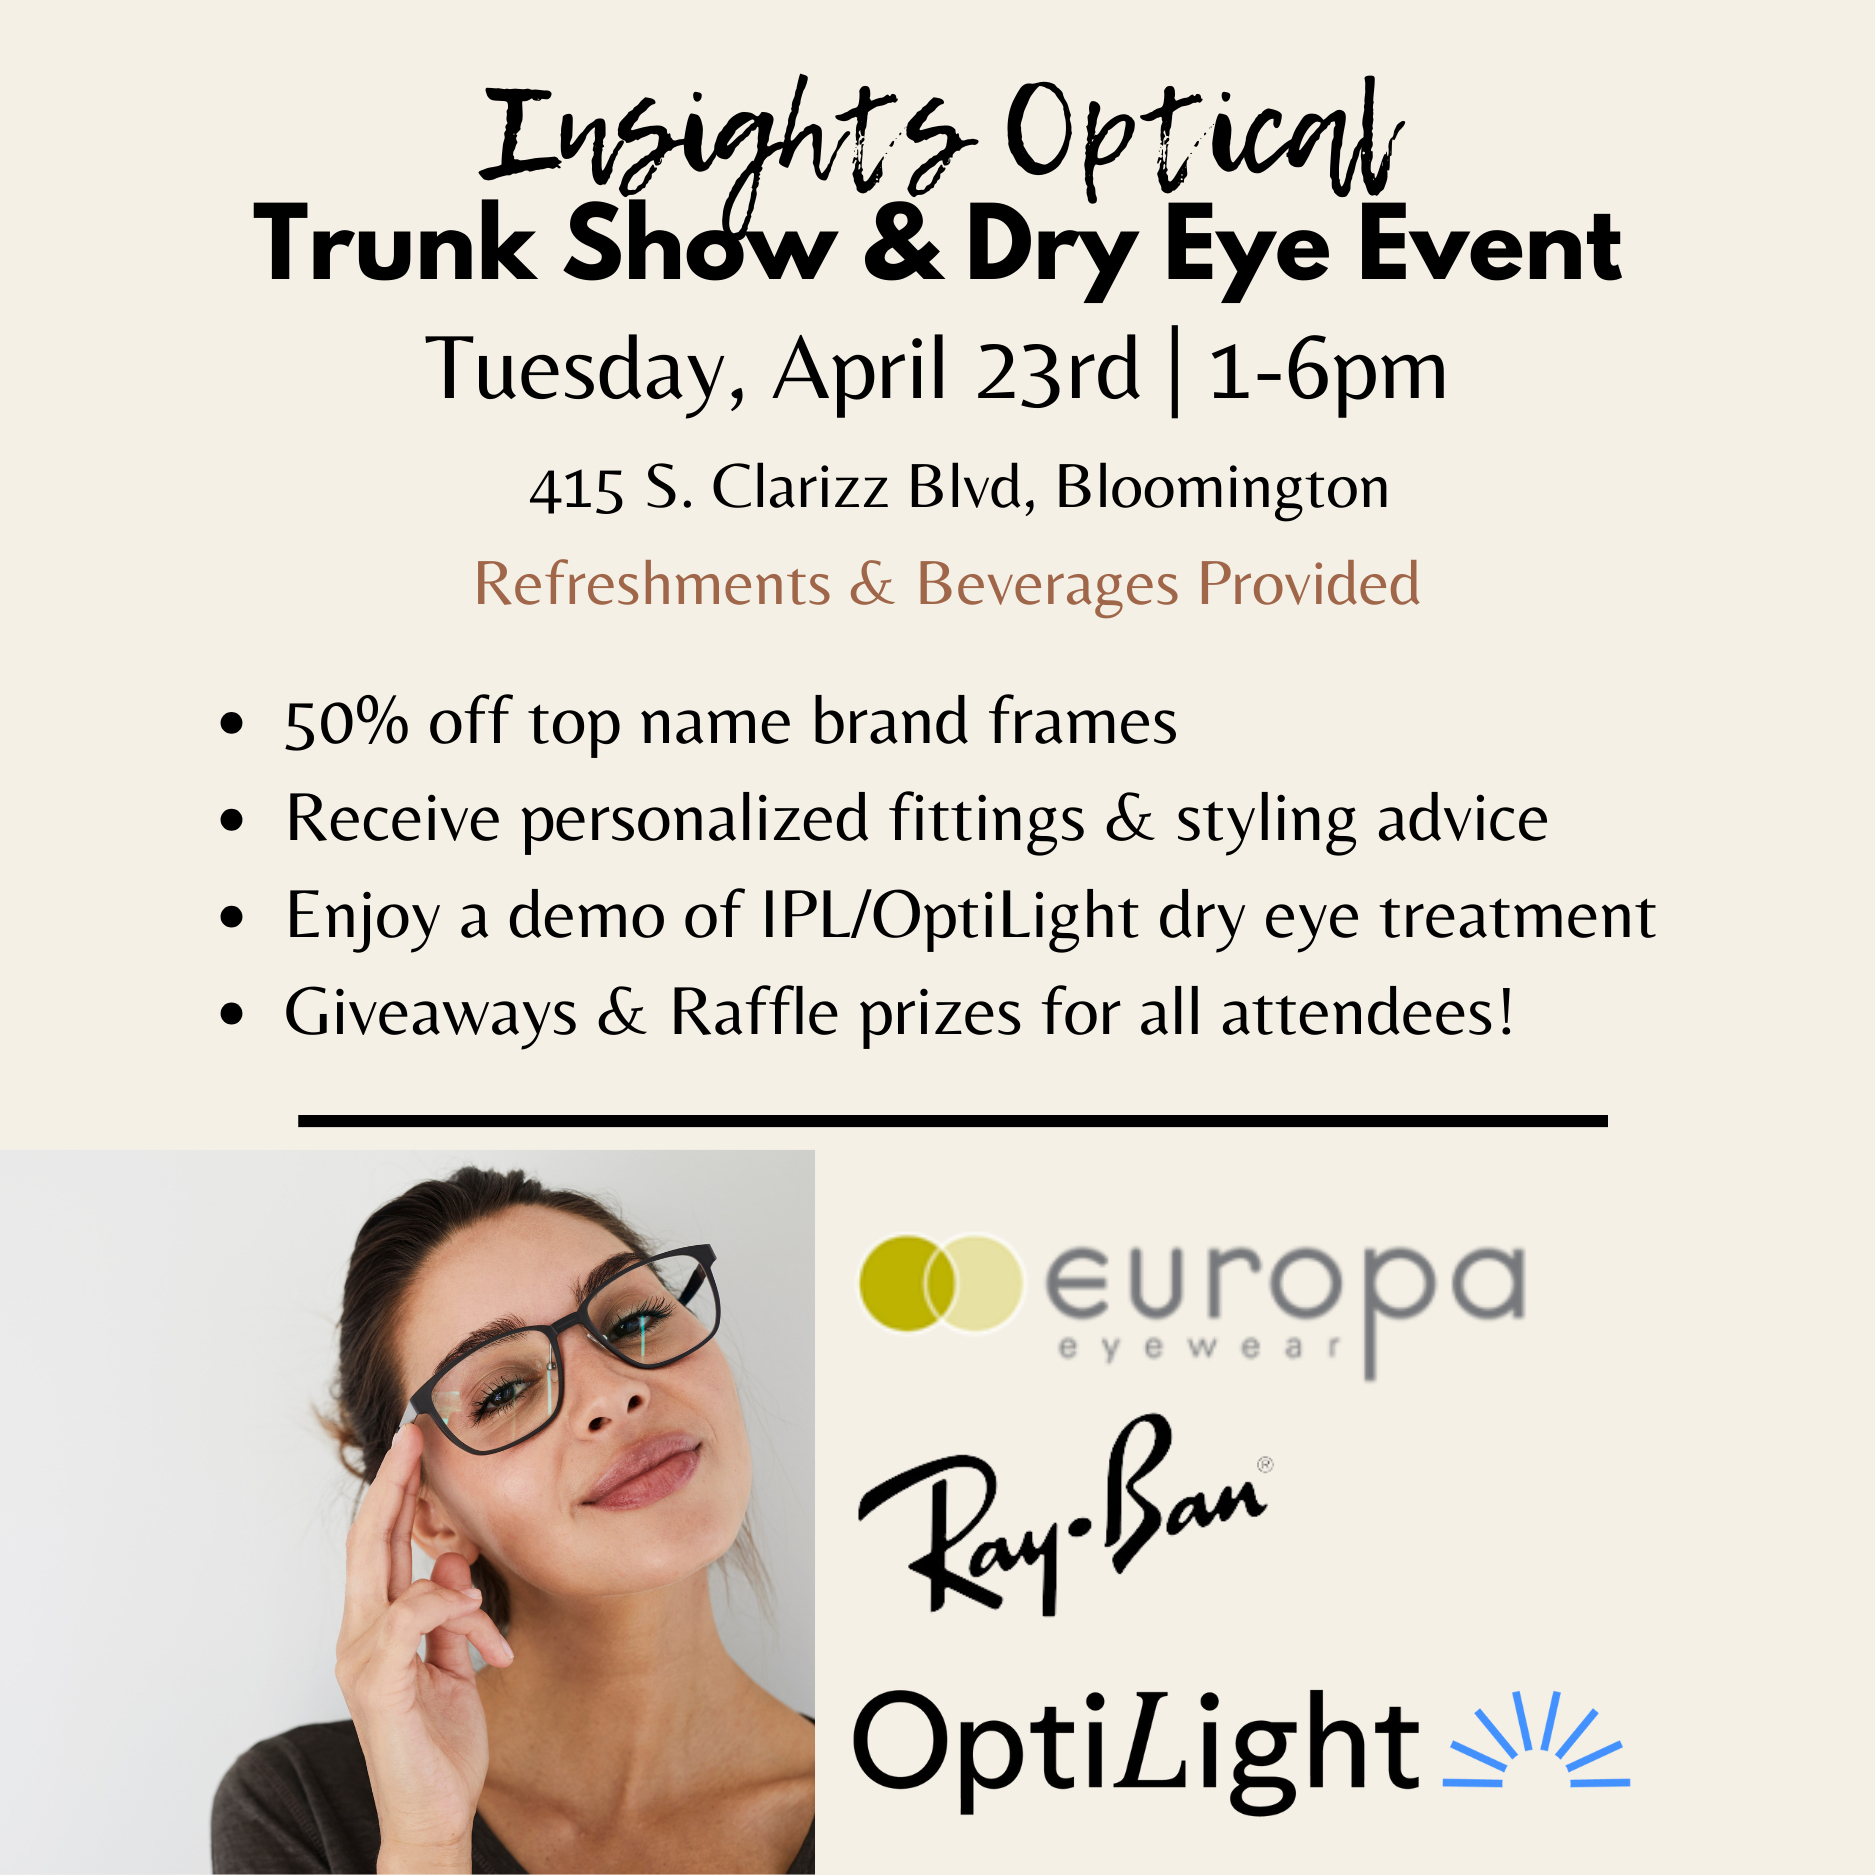 Insights Optical Trunk Show & Dry Eye Event Tuesday, April 23rd from 1-6pm